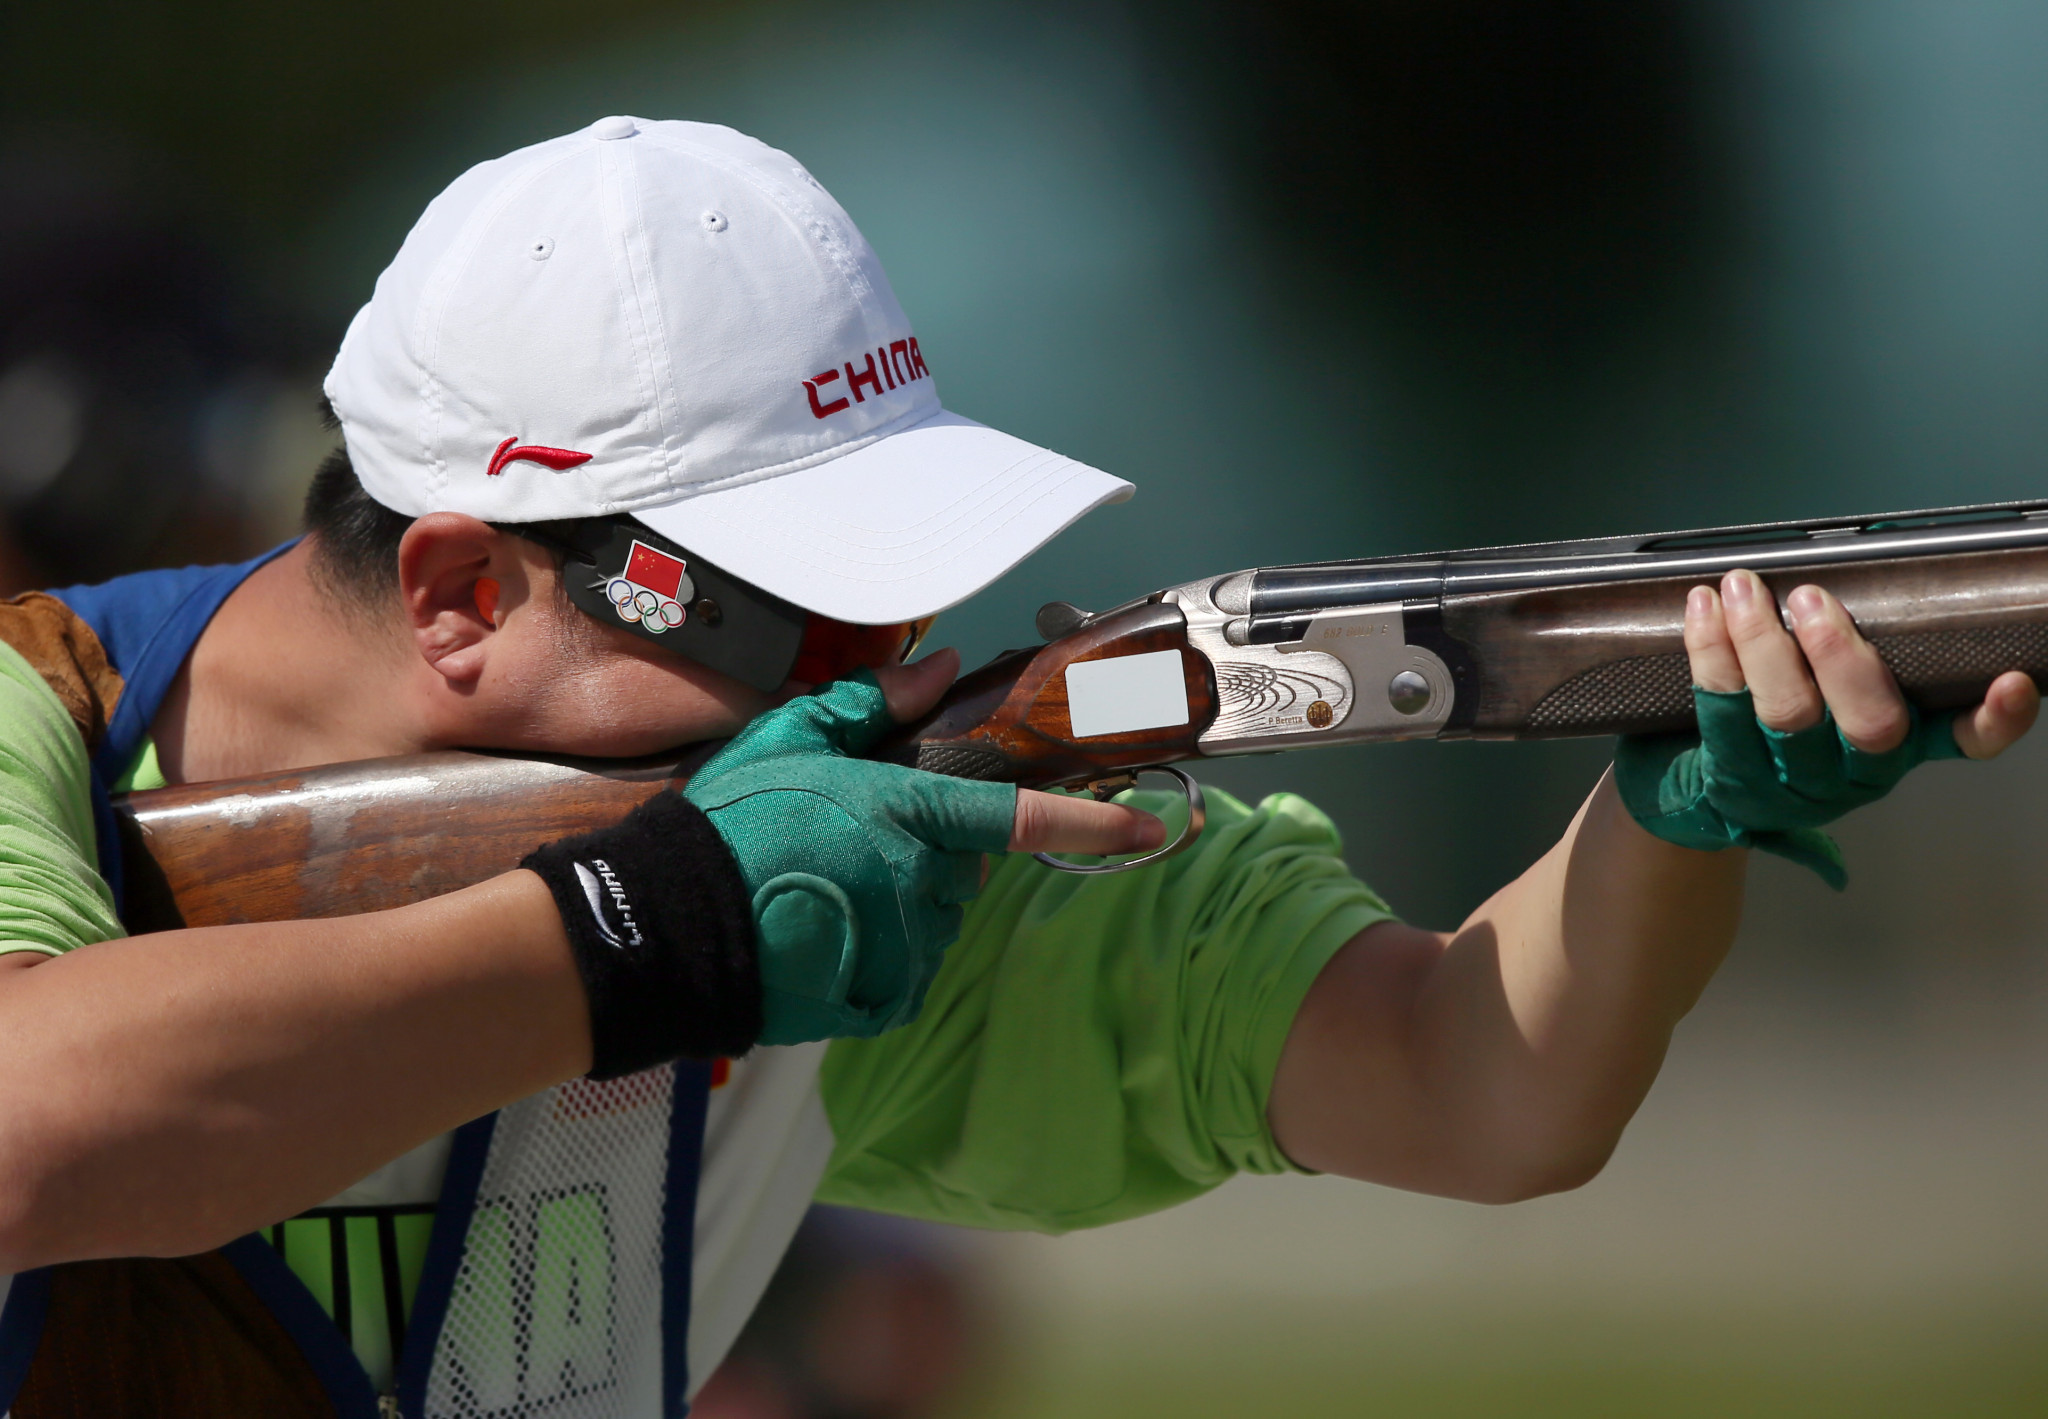 Gold and silver for China as Kazakhstan dominate in junior event at Asian Shotgun Championships